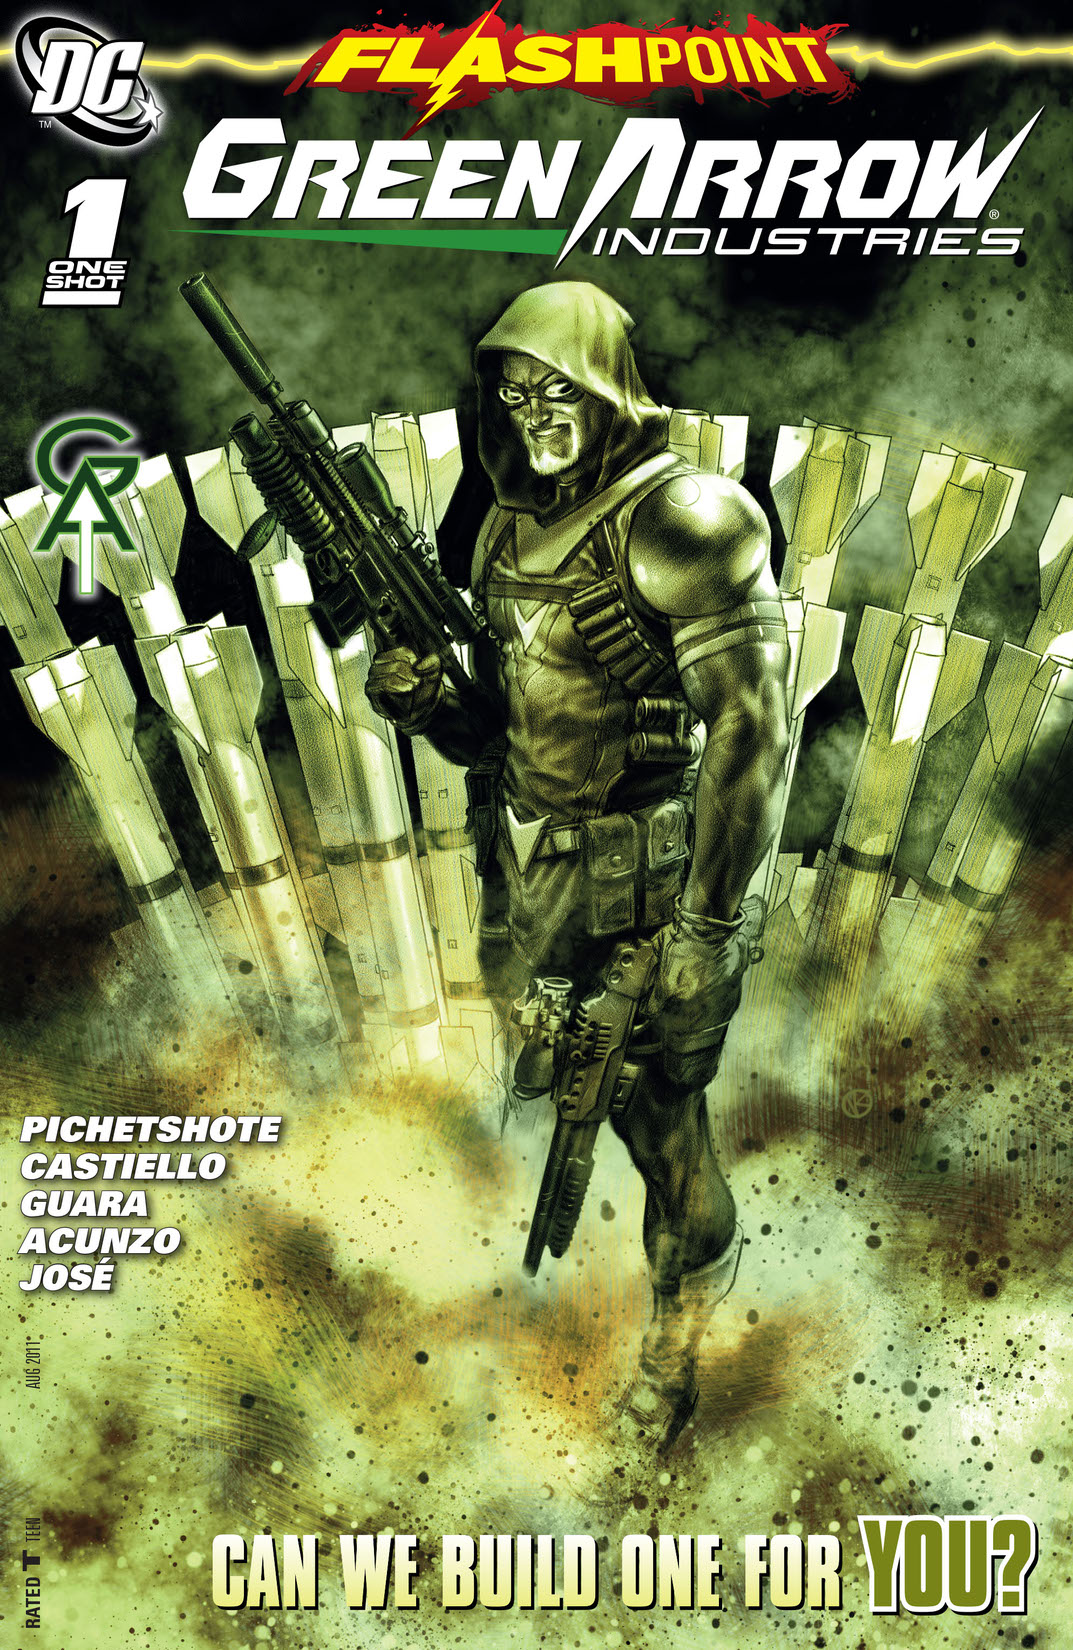 Flashpoint: Green Arrow Industries #1 preview images